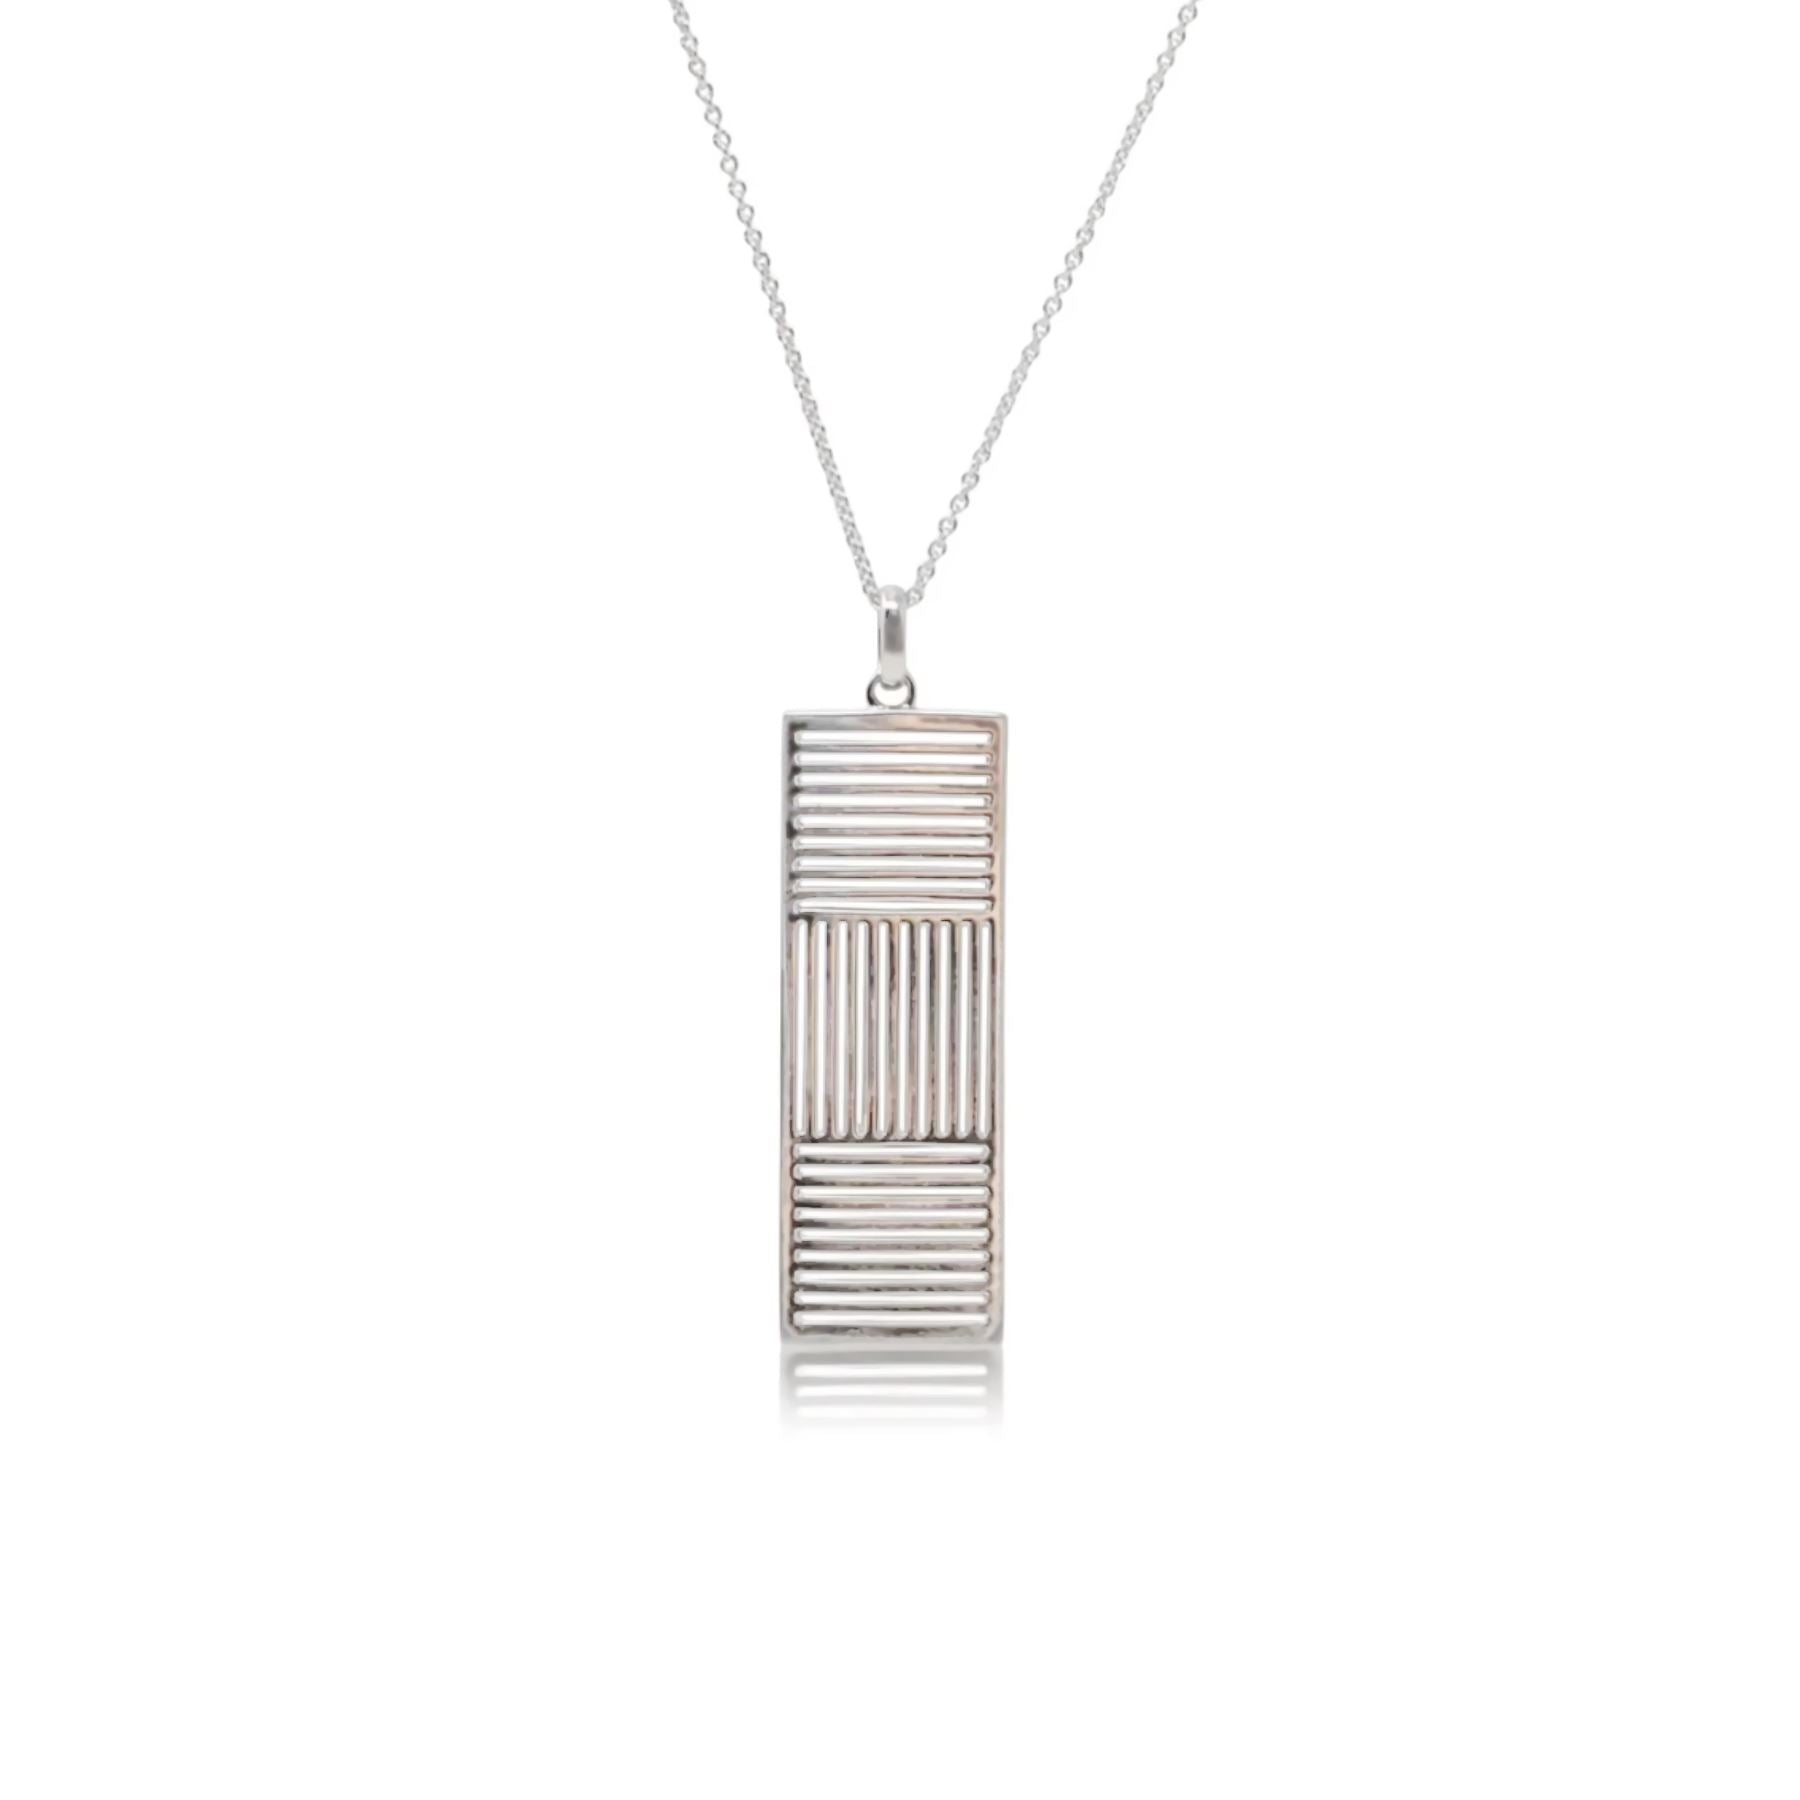 Products by Louis Vuitton: Silver Lockit pendant, sterling silver